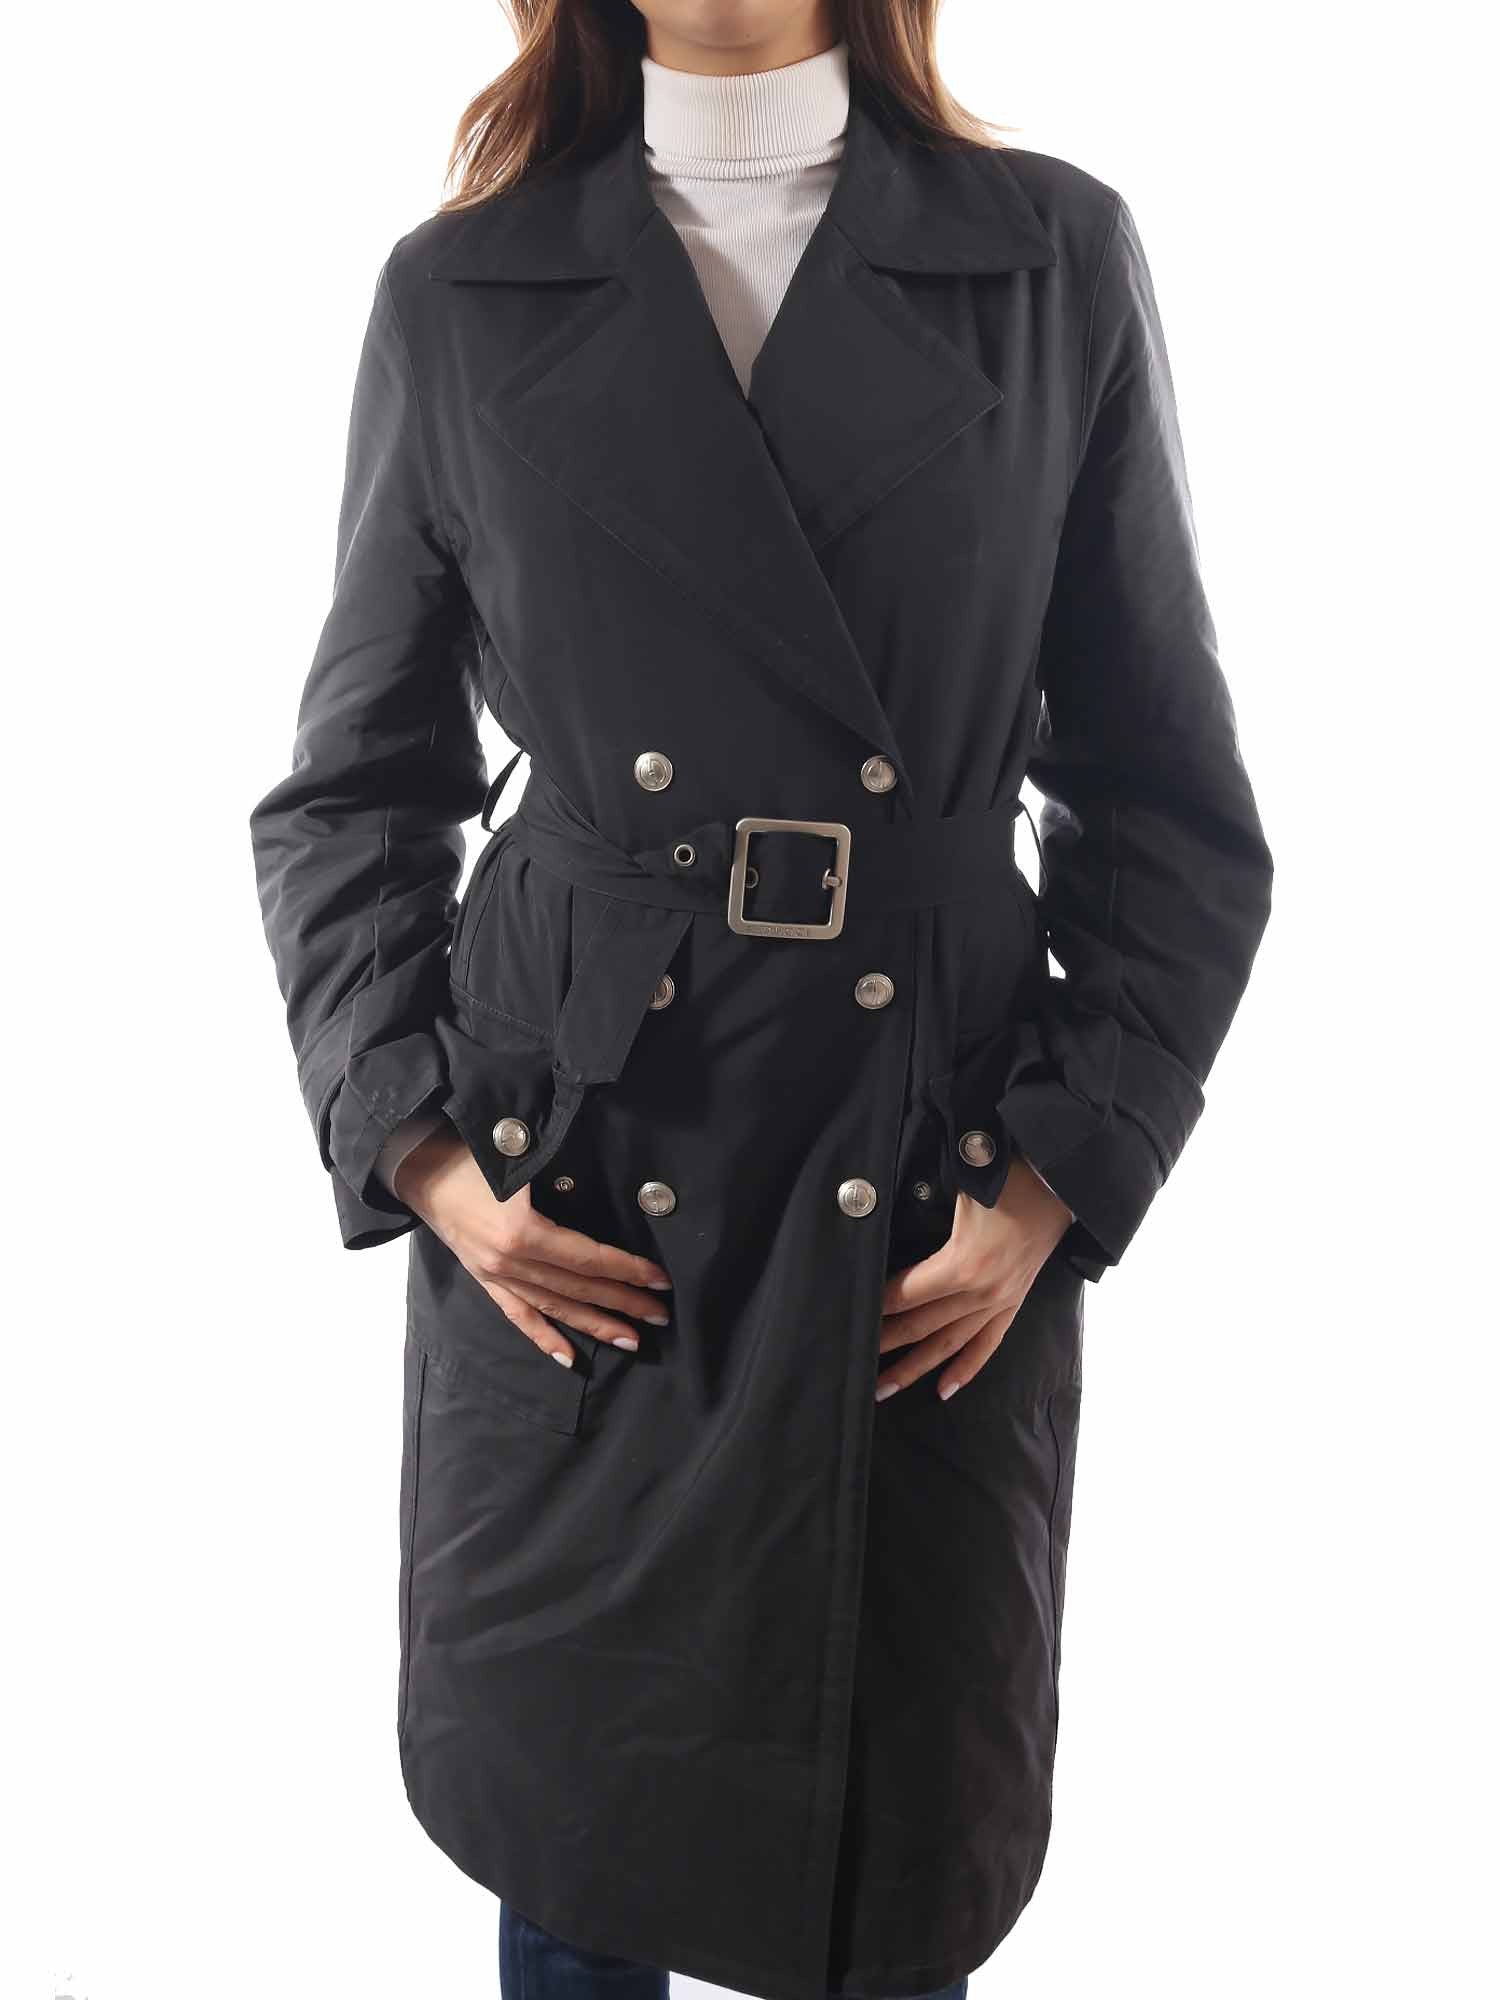 Pre-owned Gucci Trench Coat | Sabrina's Closet